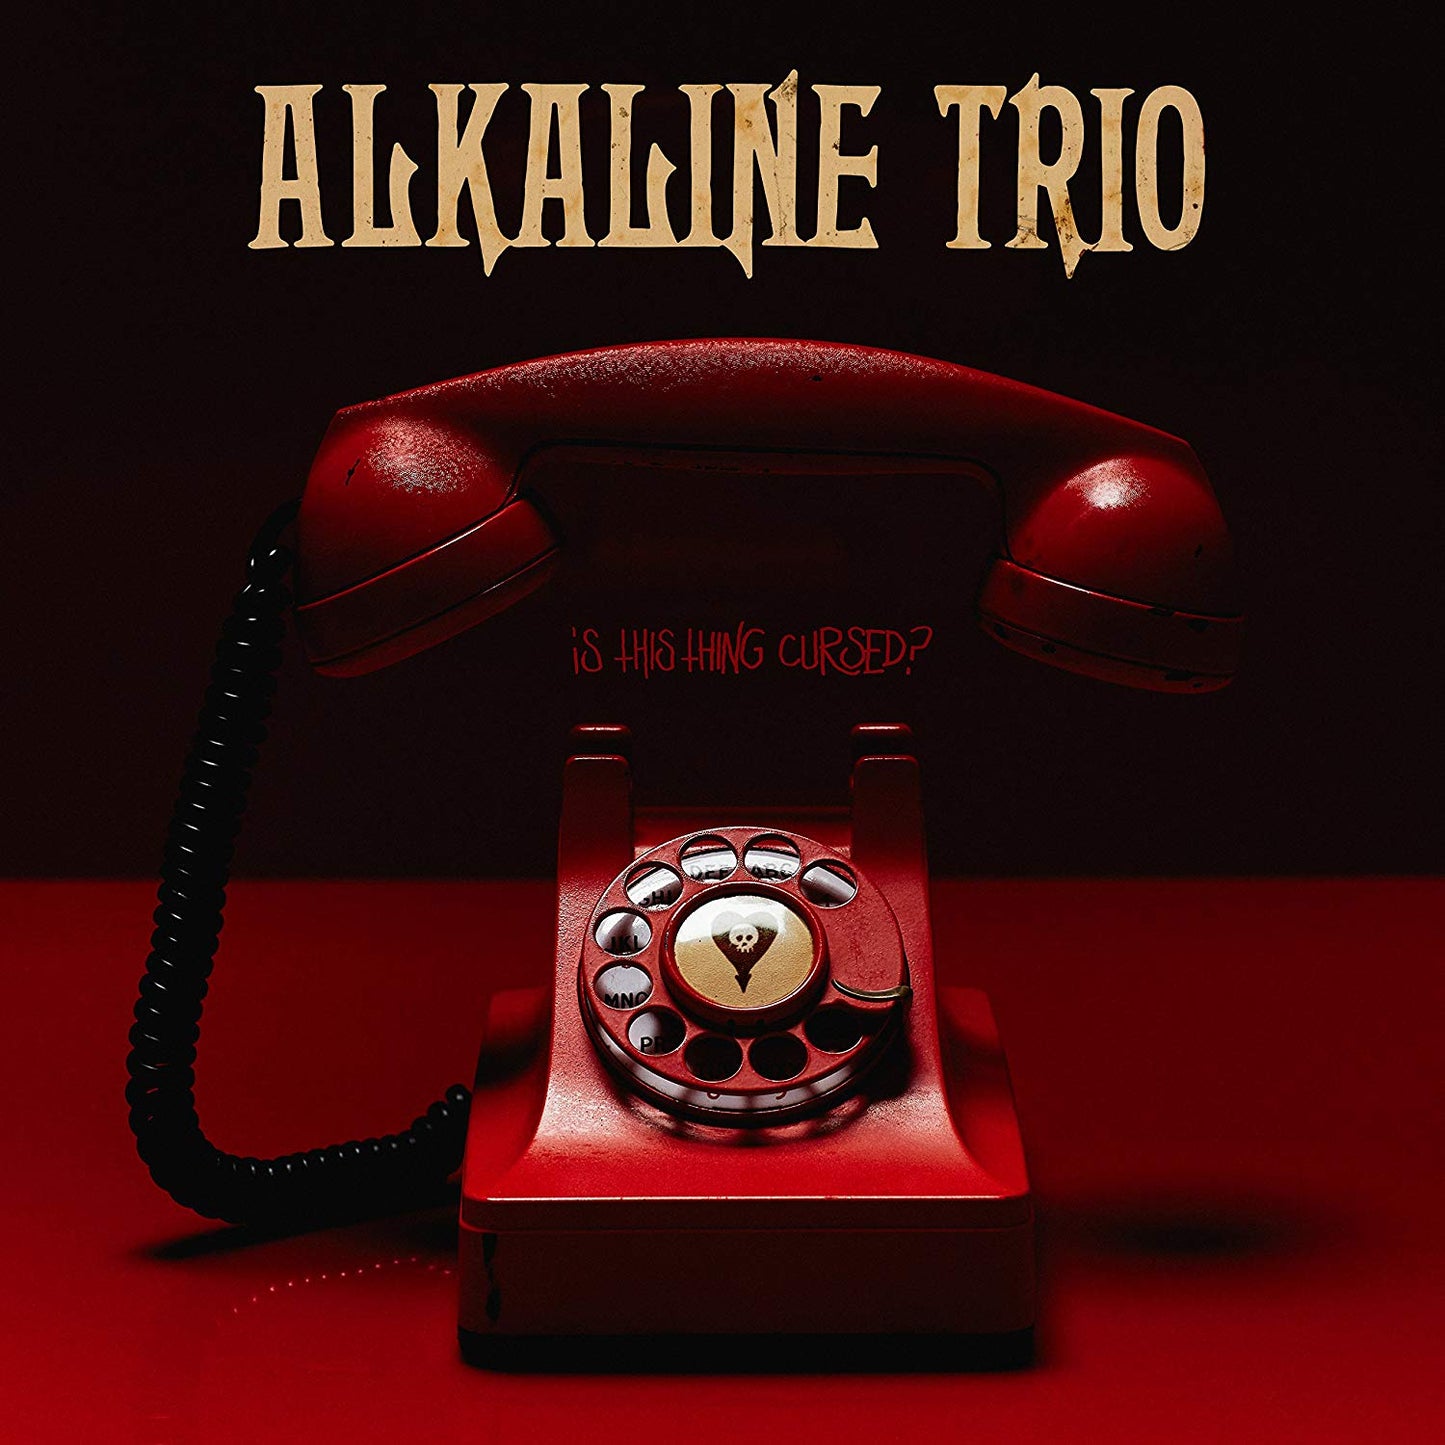 CD - Alkaline Trio - Is This Thing Cursed